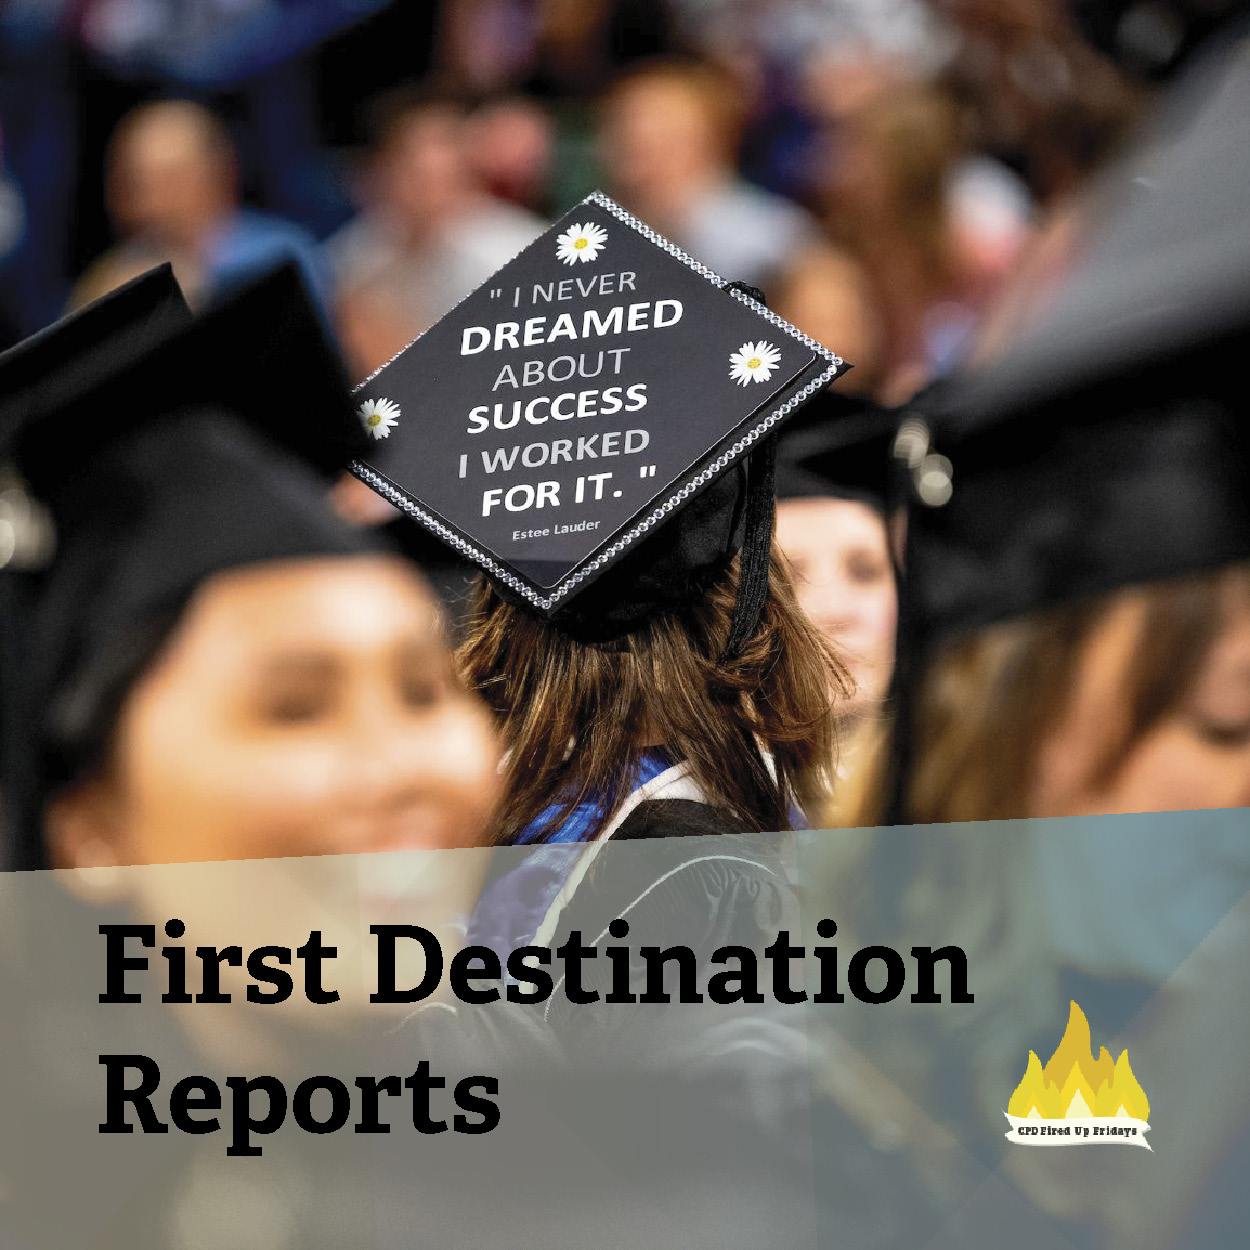 A crowd of students in cap and gown attend graduation. Written on the top of one cap is 'I never dreamed about success, I worked for it. - Estee Lauder'. Underneath the photo, text reads: 'First Destination Reports.'